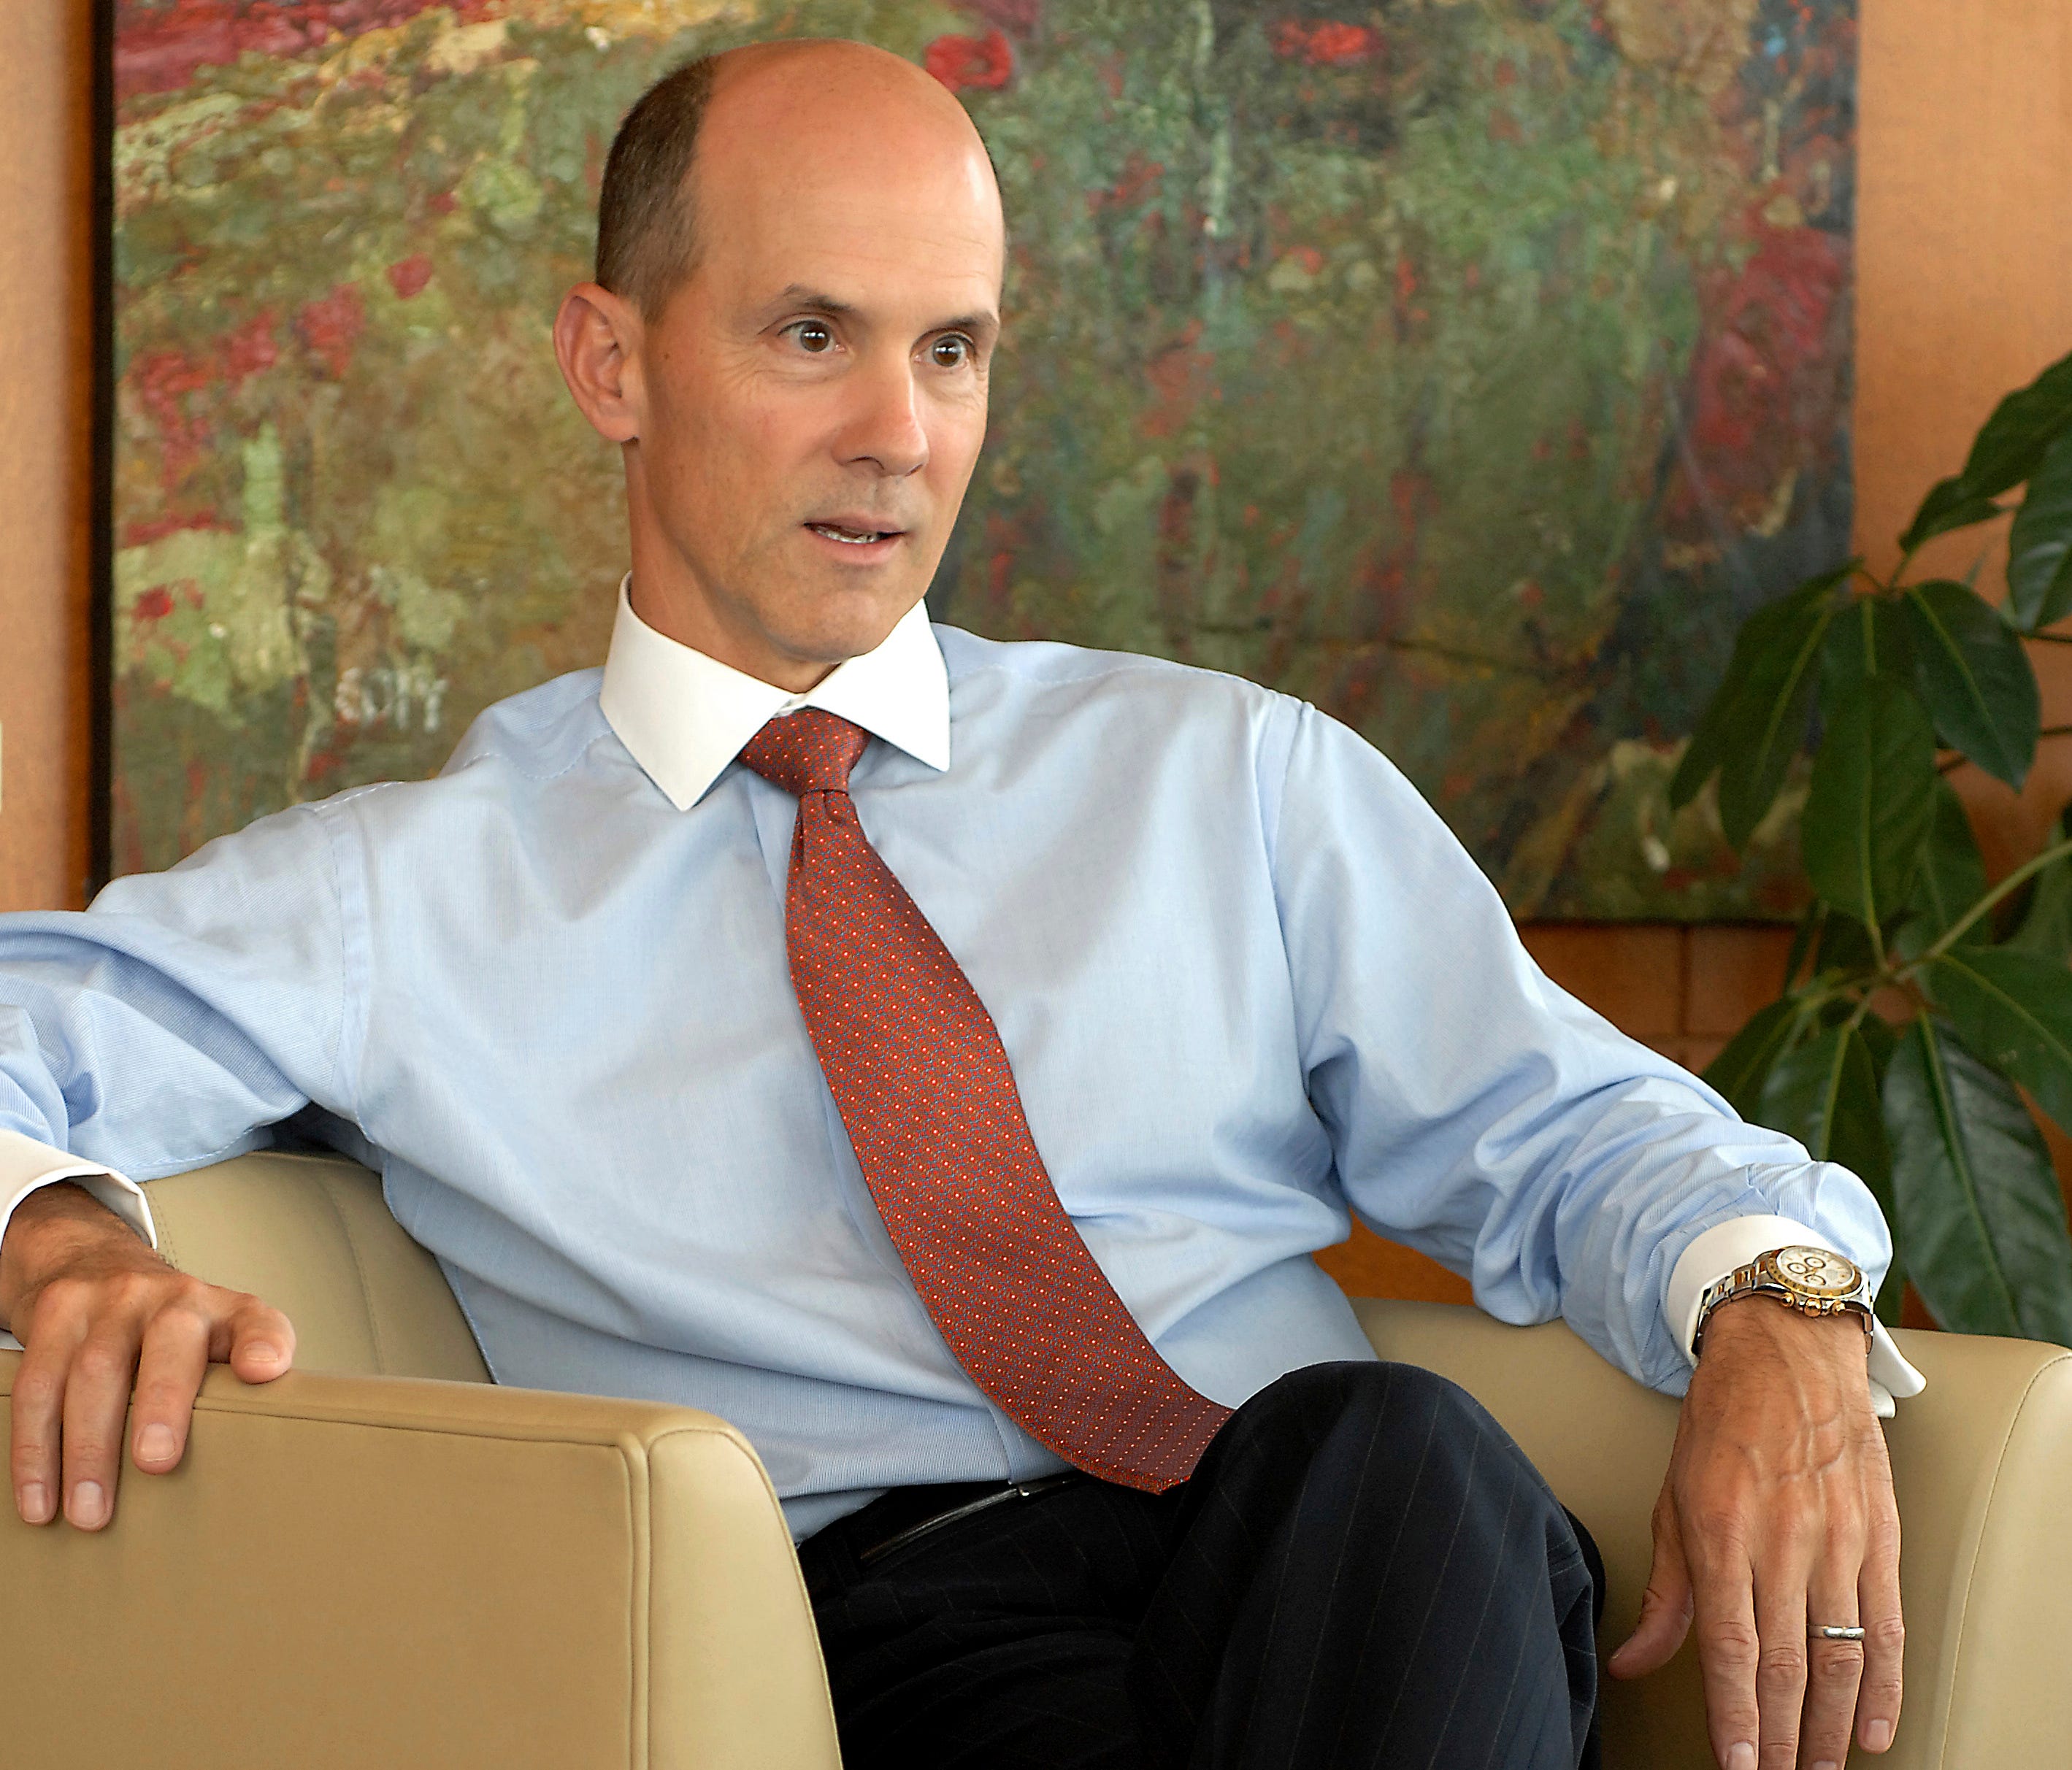 File photo taken in 2007 shows then-Equifax CEO and President Richard Smith at the credit-reporting company's headquarters.